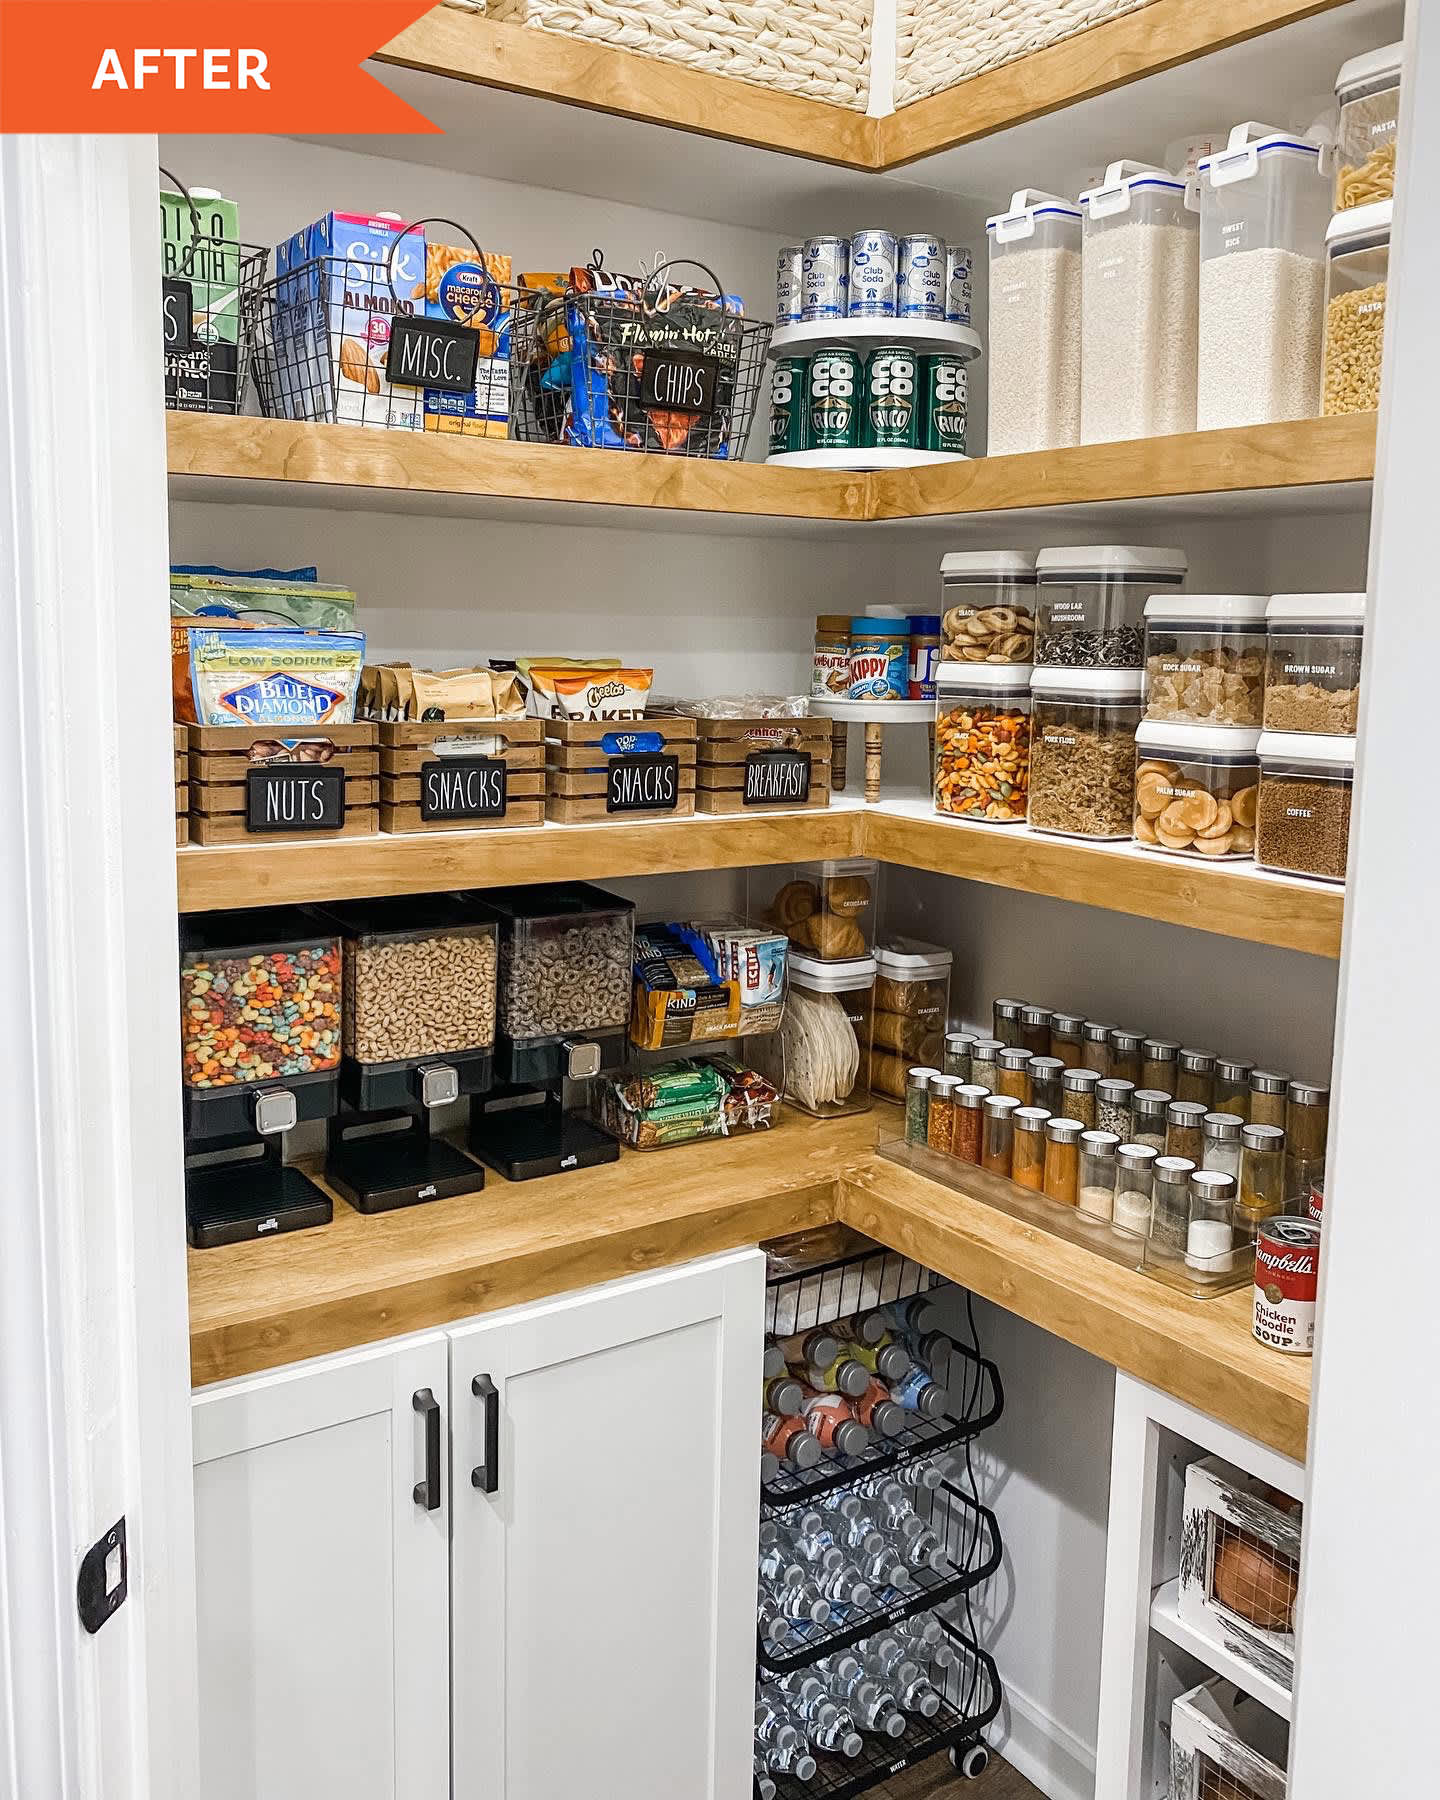 https://cdn.apartmenttherapy.info/image/upload/v1659107620/at/organize-clean/before-after/Tracey%20Pantry/Tracey_After1.jpg